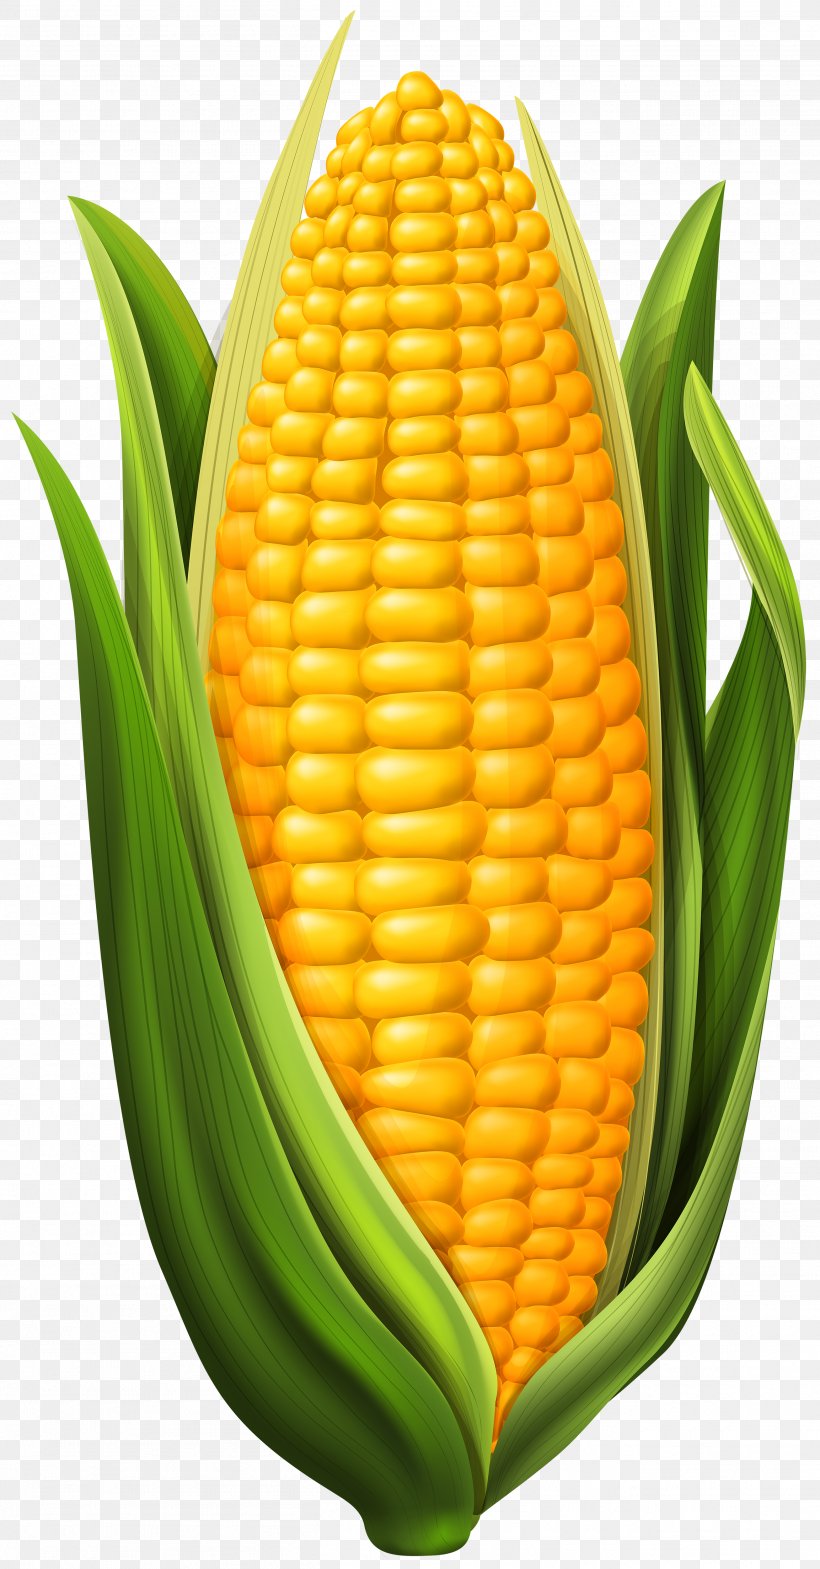 Corn On The Cob Maize Clip Art, PNG, 2613x5000px, Candy Corn, Commodity, Corn Kernels, Corn On The Cob, Drawing Download Free